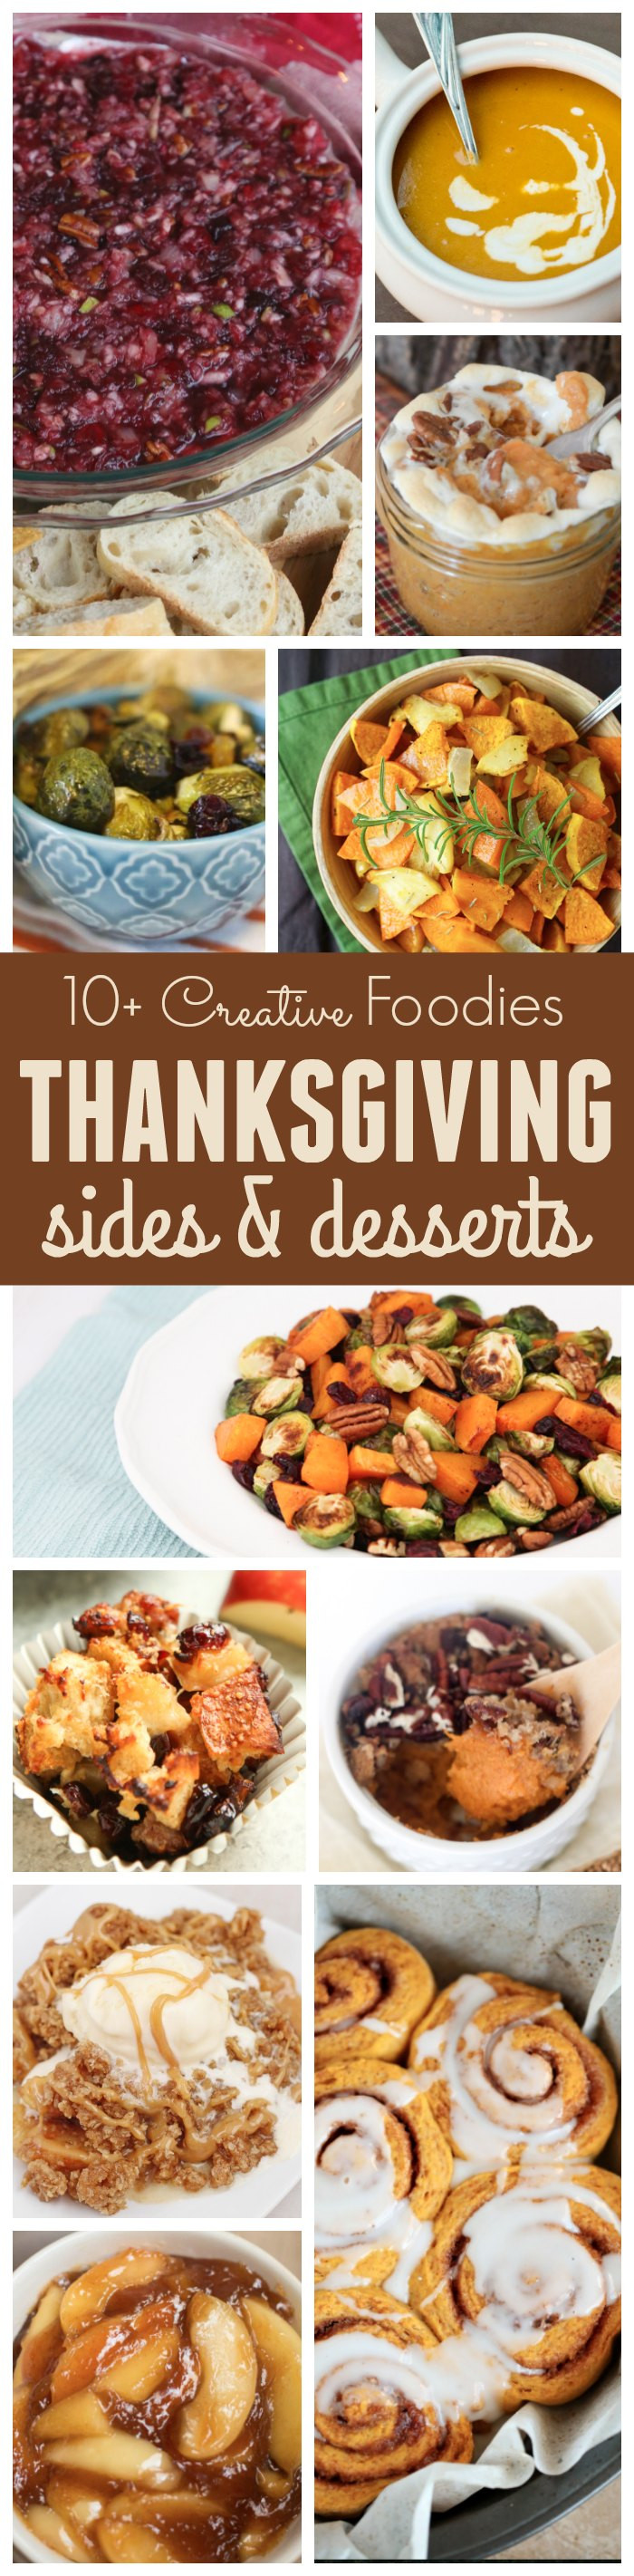 Thanksgiving Side Dishes Recipes
 Thanksgiving Side Dish Butternut Squash Brussel Sprouts